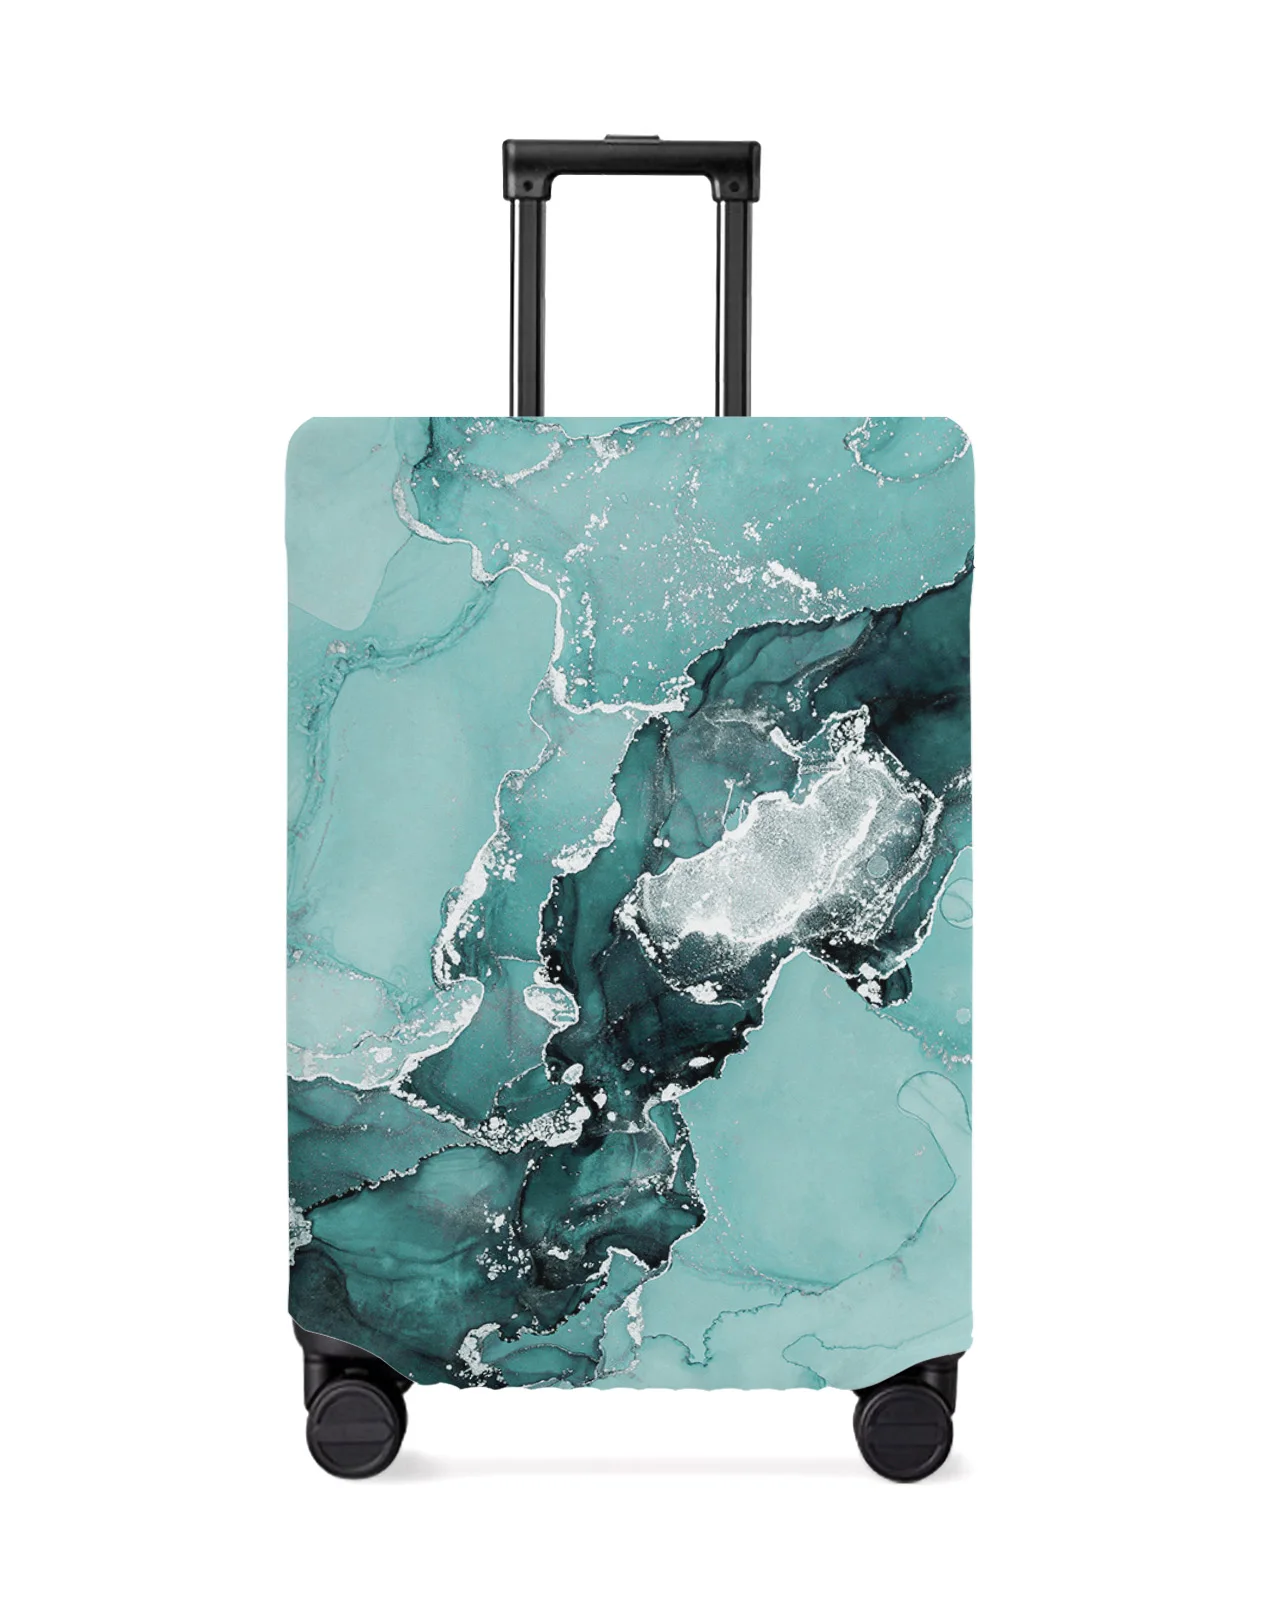 marble-texture-ink-green-luggage-cover-stretch-suitcase-protector-baggage-dust-case-cover-for-18-32-inch-travel-suitcase-case